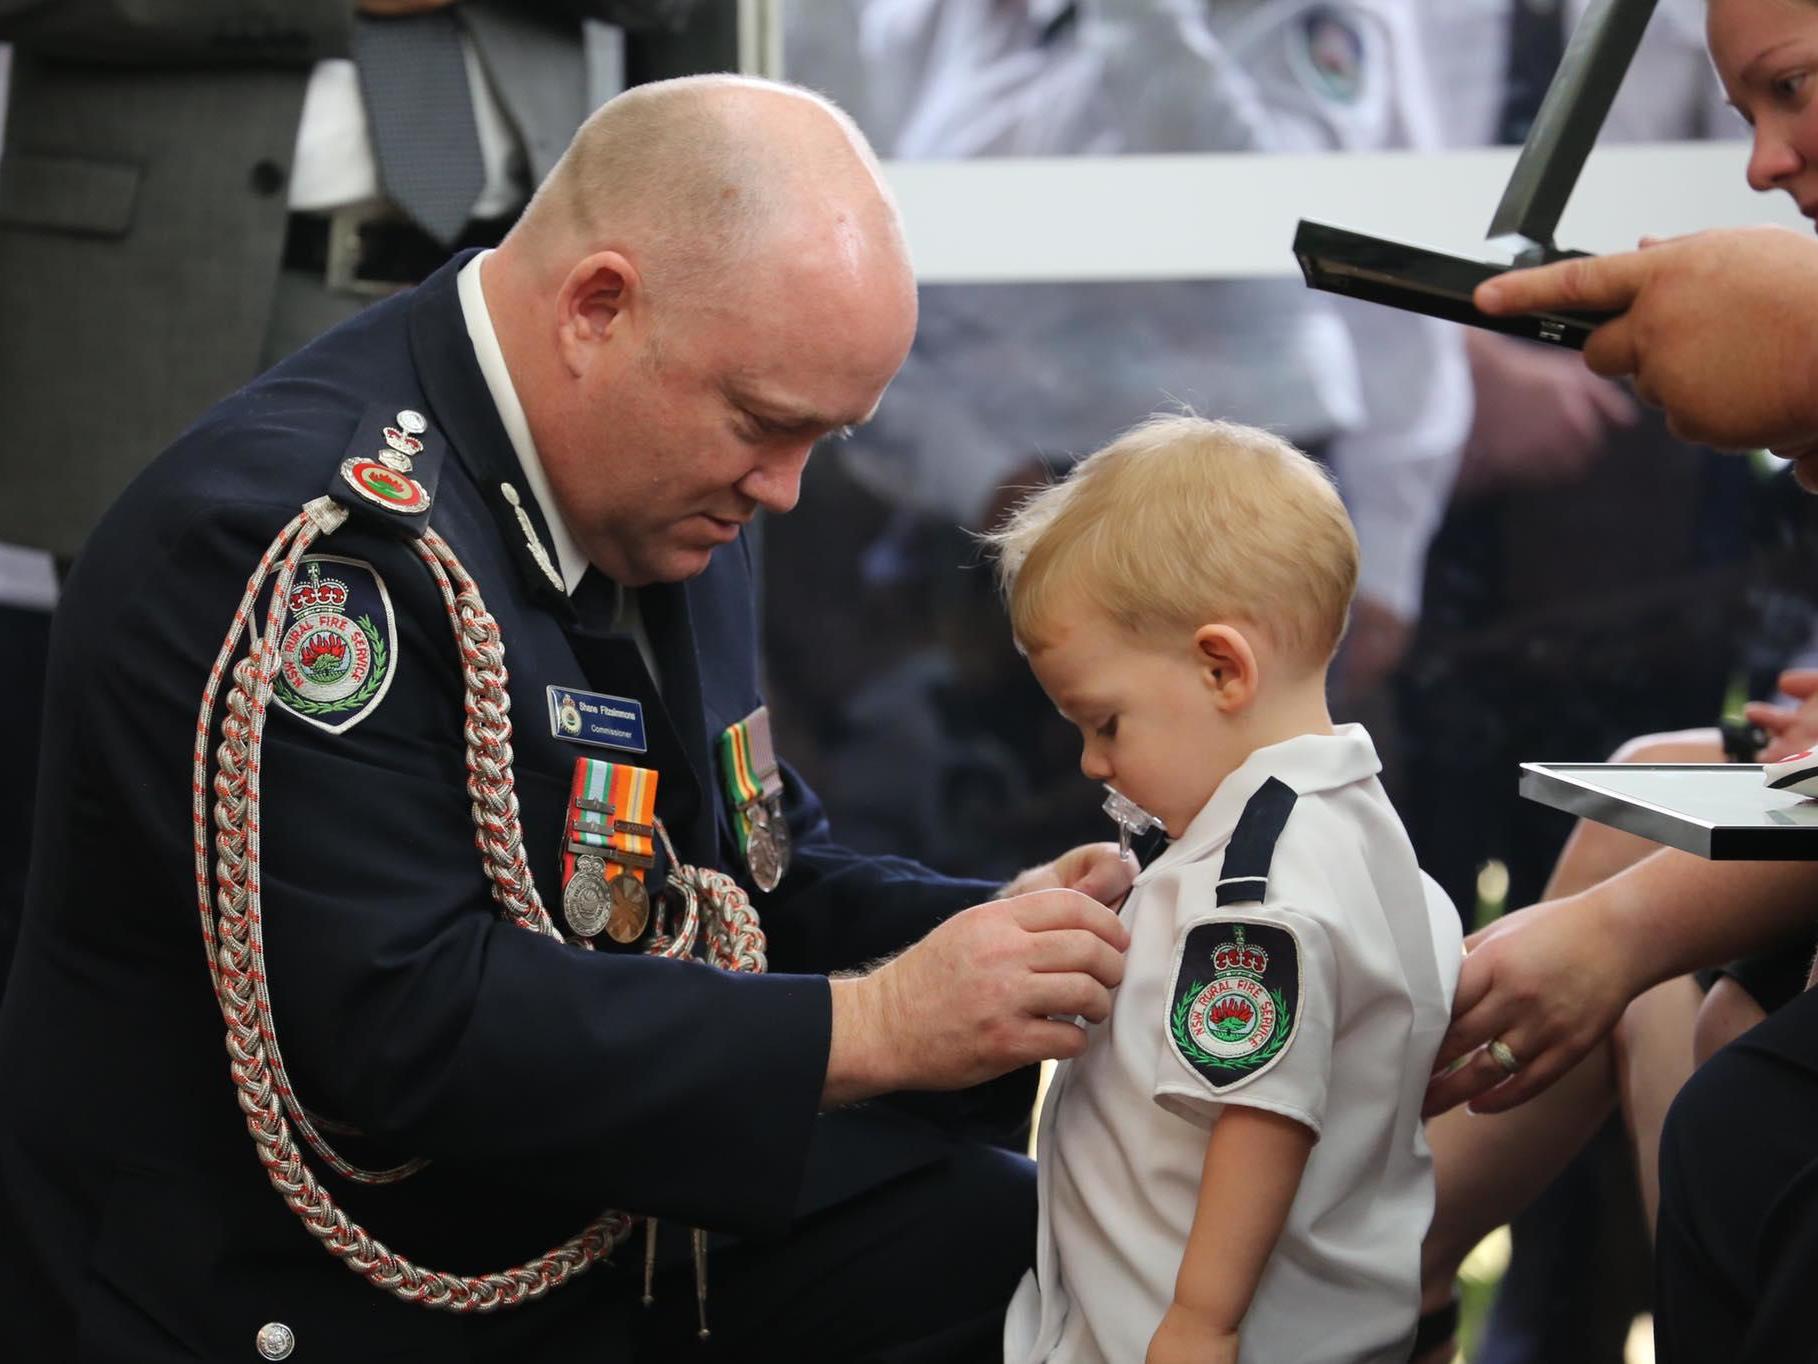 Harvey Keaton, aged 19 months, receives his father Geoffrey Keaton's posthumous bravery medal after the volunteer firefighter was killed on his way to tackle wildfires in New South Wales, Australia, 19 December, 2019.